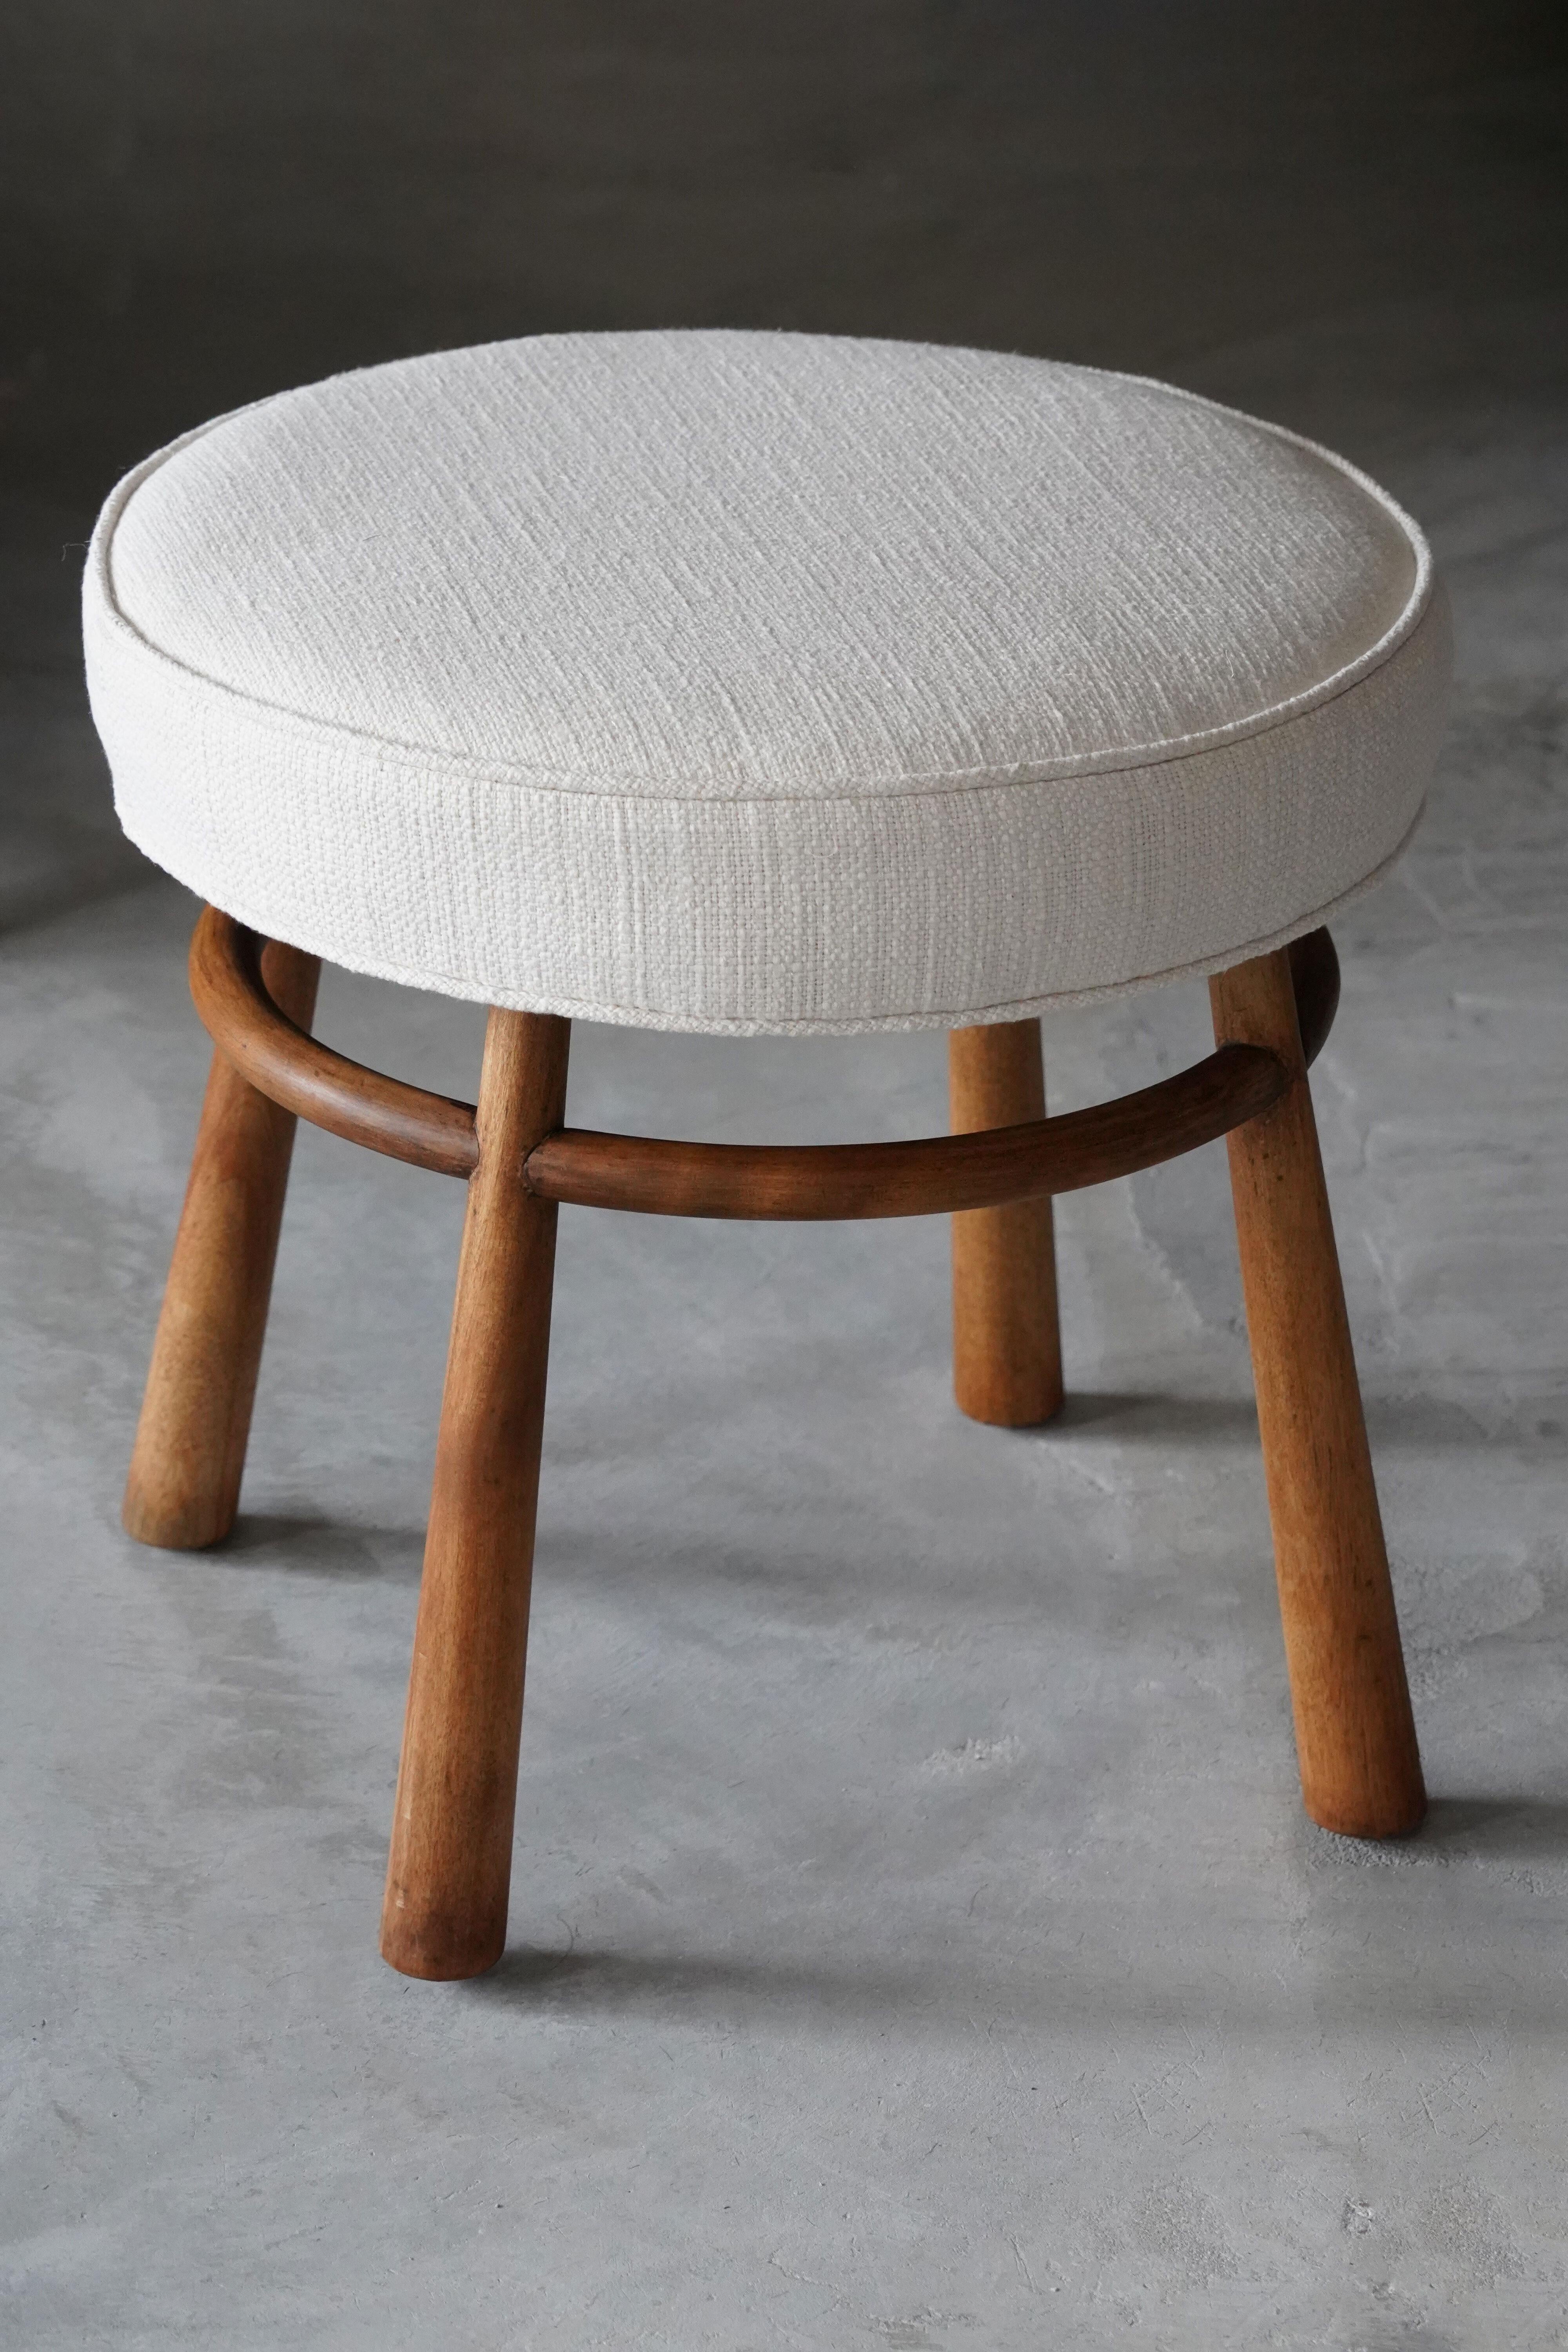 A rare stool designed by T.H. Robsjohn-Gibbings. Produced by Widdicomb Furniture Company in Grand Rapids, Michigan, circa 1950s. Executed in walnut and fabric. Labeled. 

Other American designers of the period include Edward Wormley, George